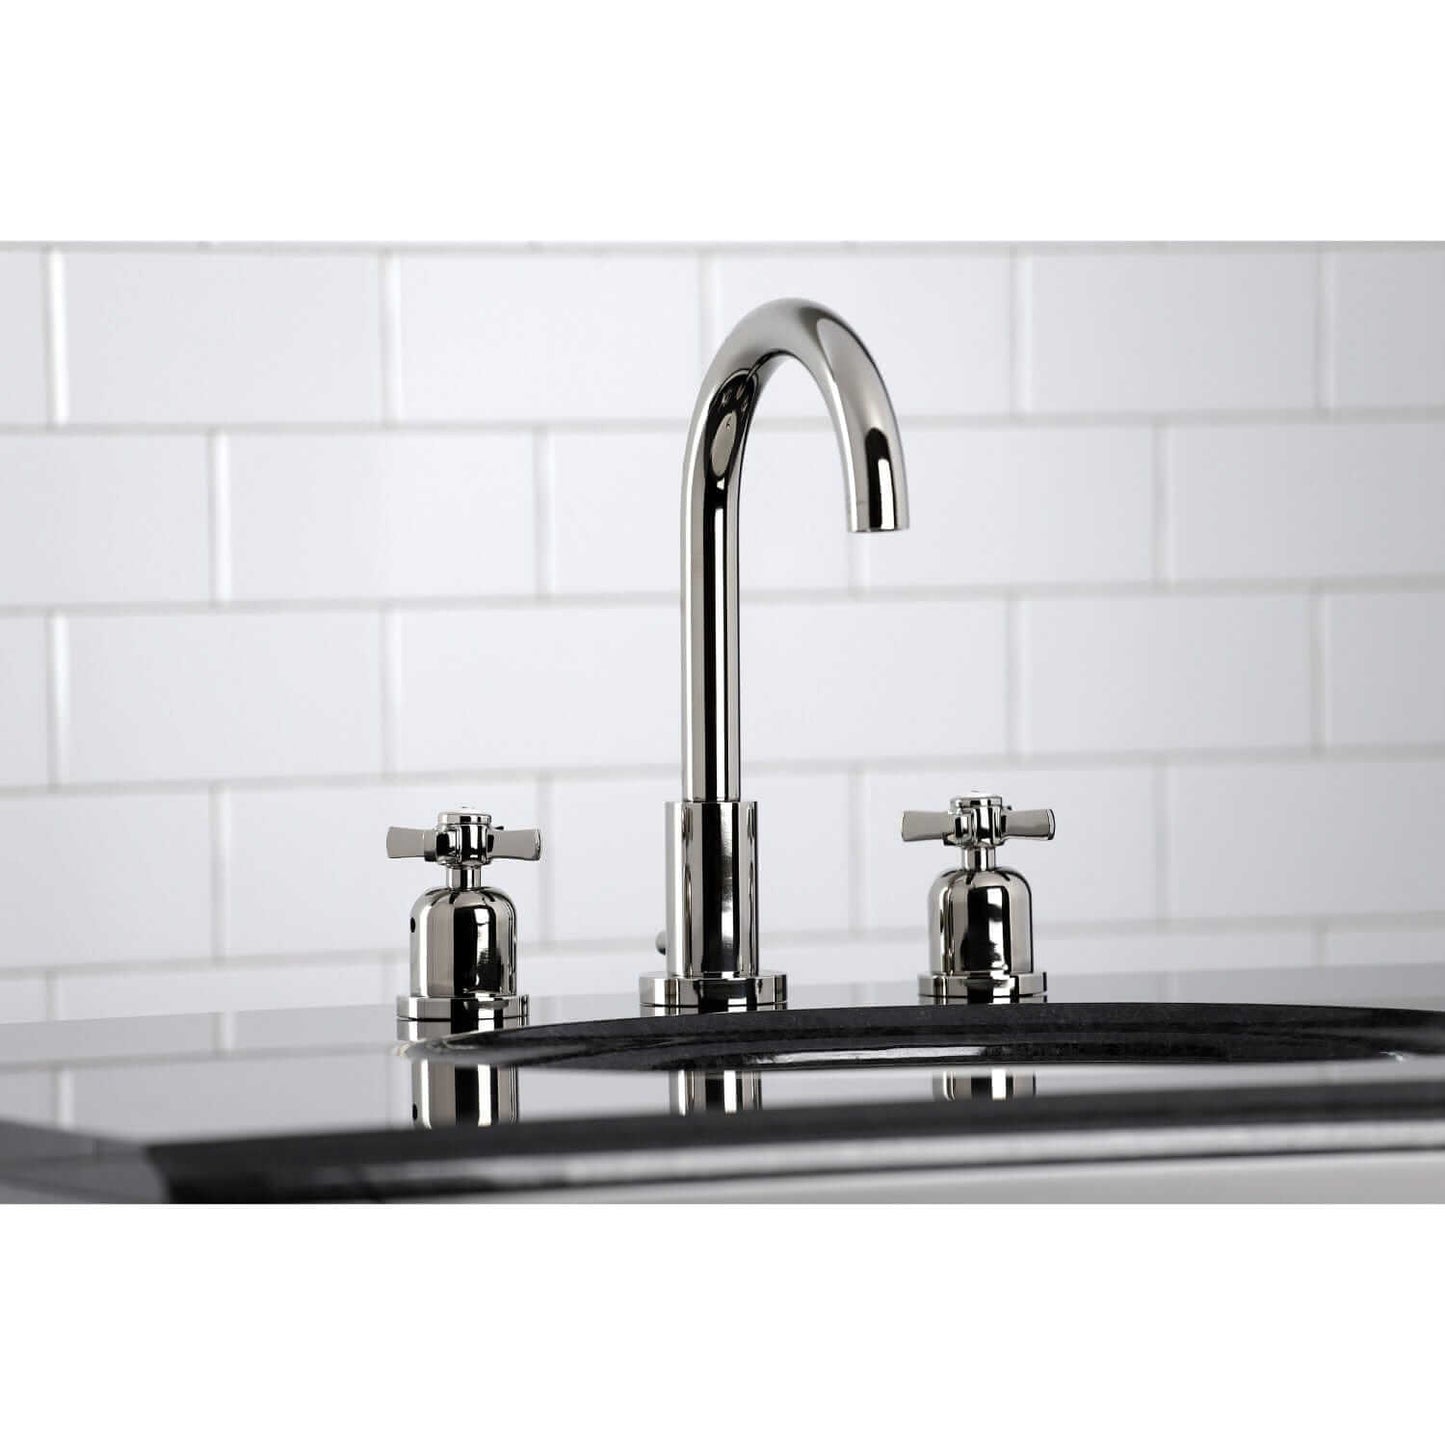 KINGSTON Brass Fauceture Millennium Widespread Bathroom Faucet - Polished Nickel